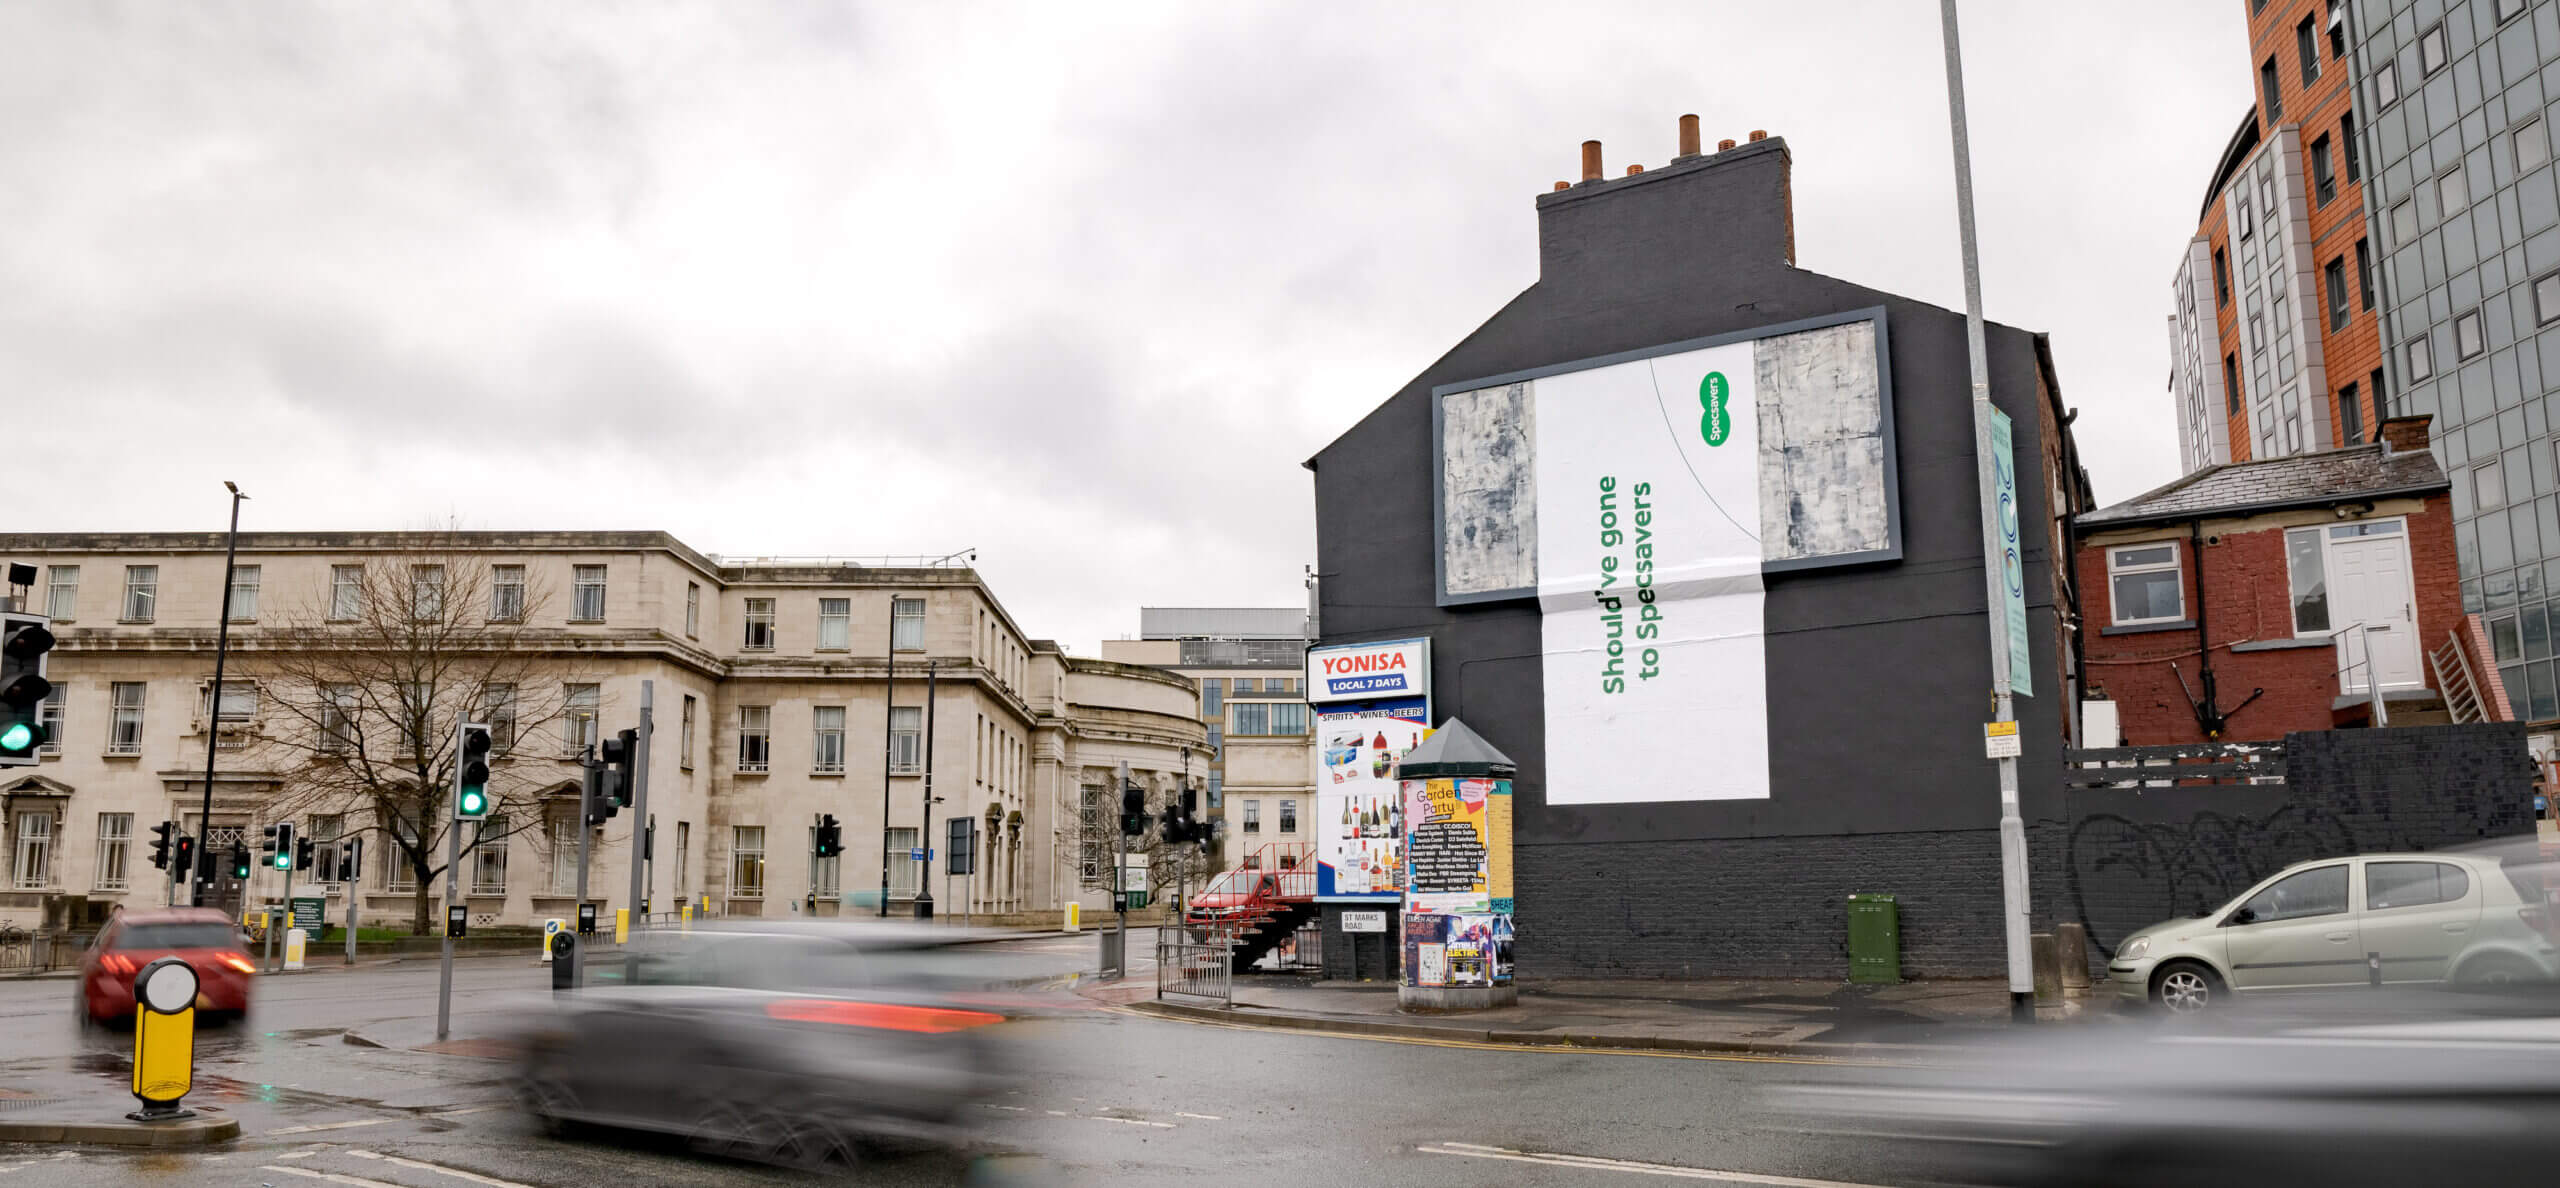 ‘Billboard Blunder’ a 48-sheet poster that had been installed at a 180-degree angle up the wall and billboard.